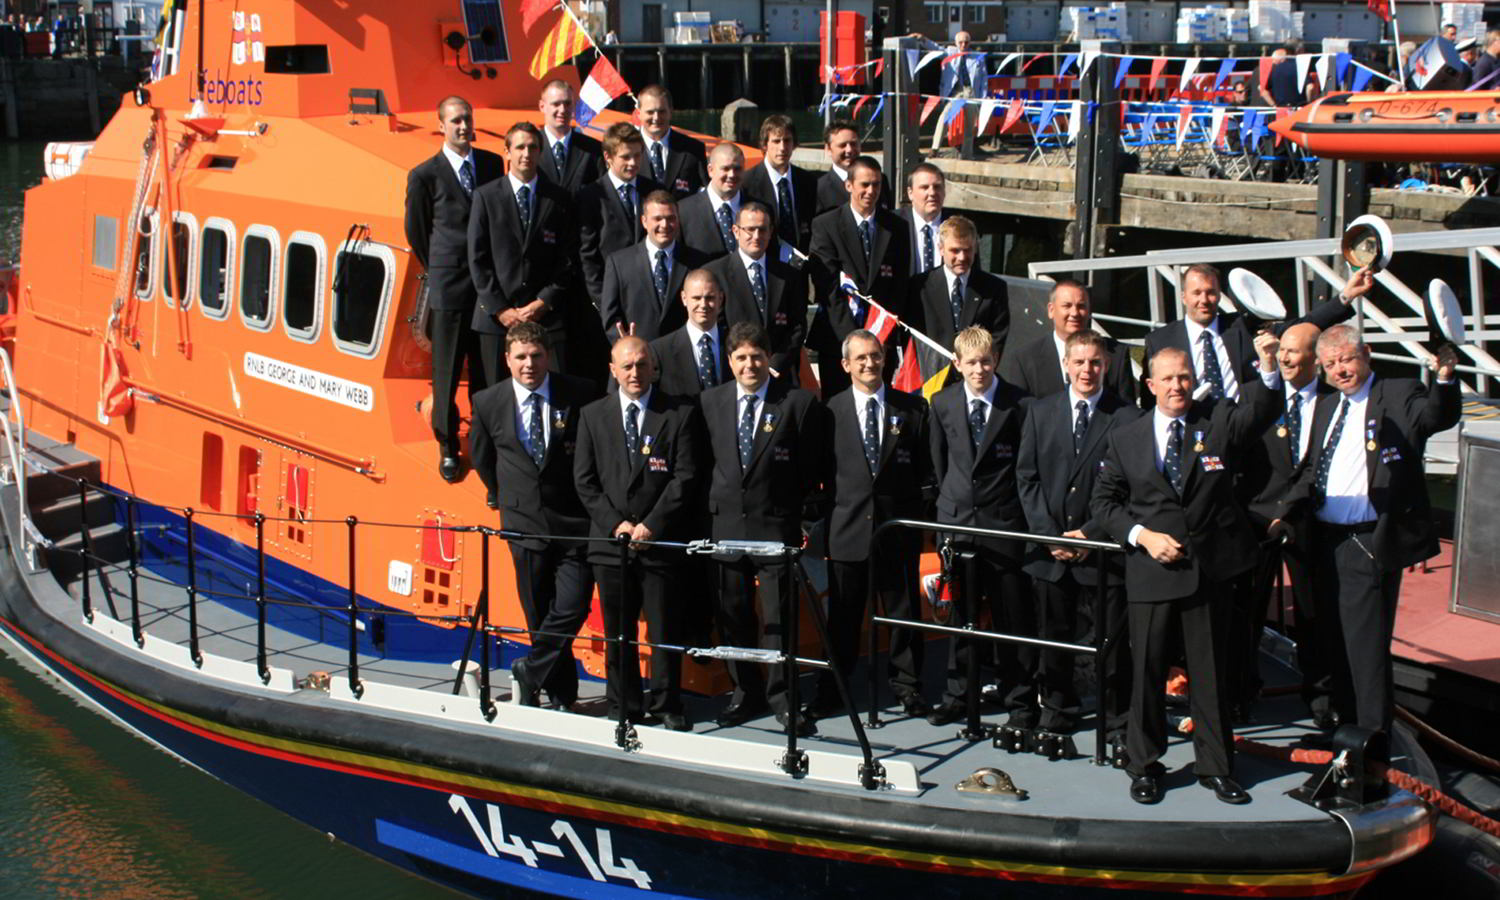 The Very Proud Lifeboat Crewmen